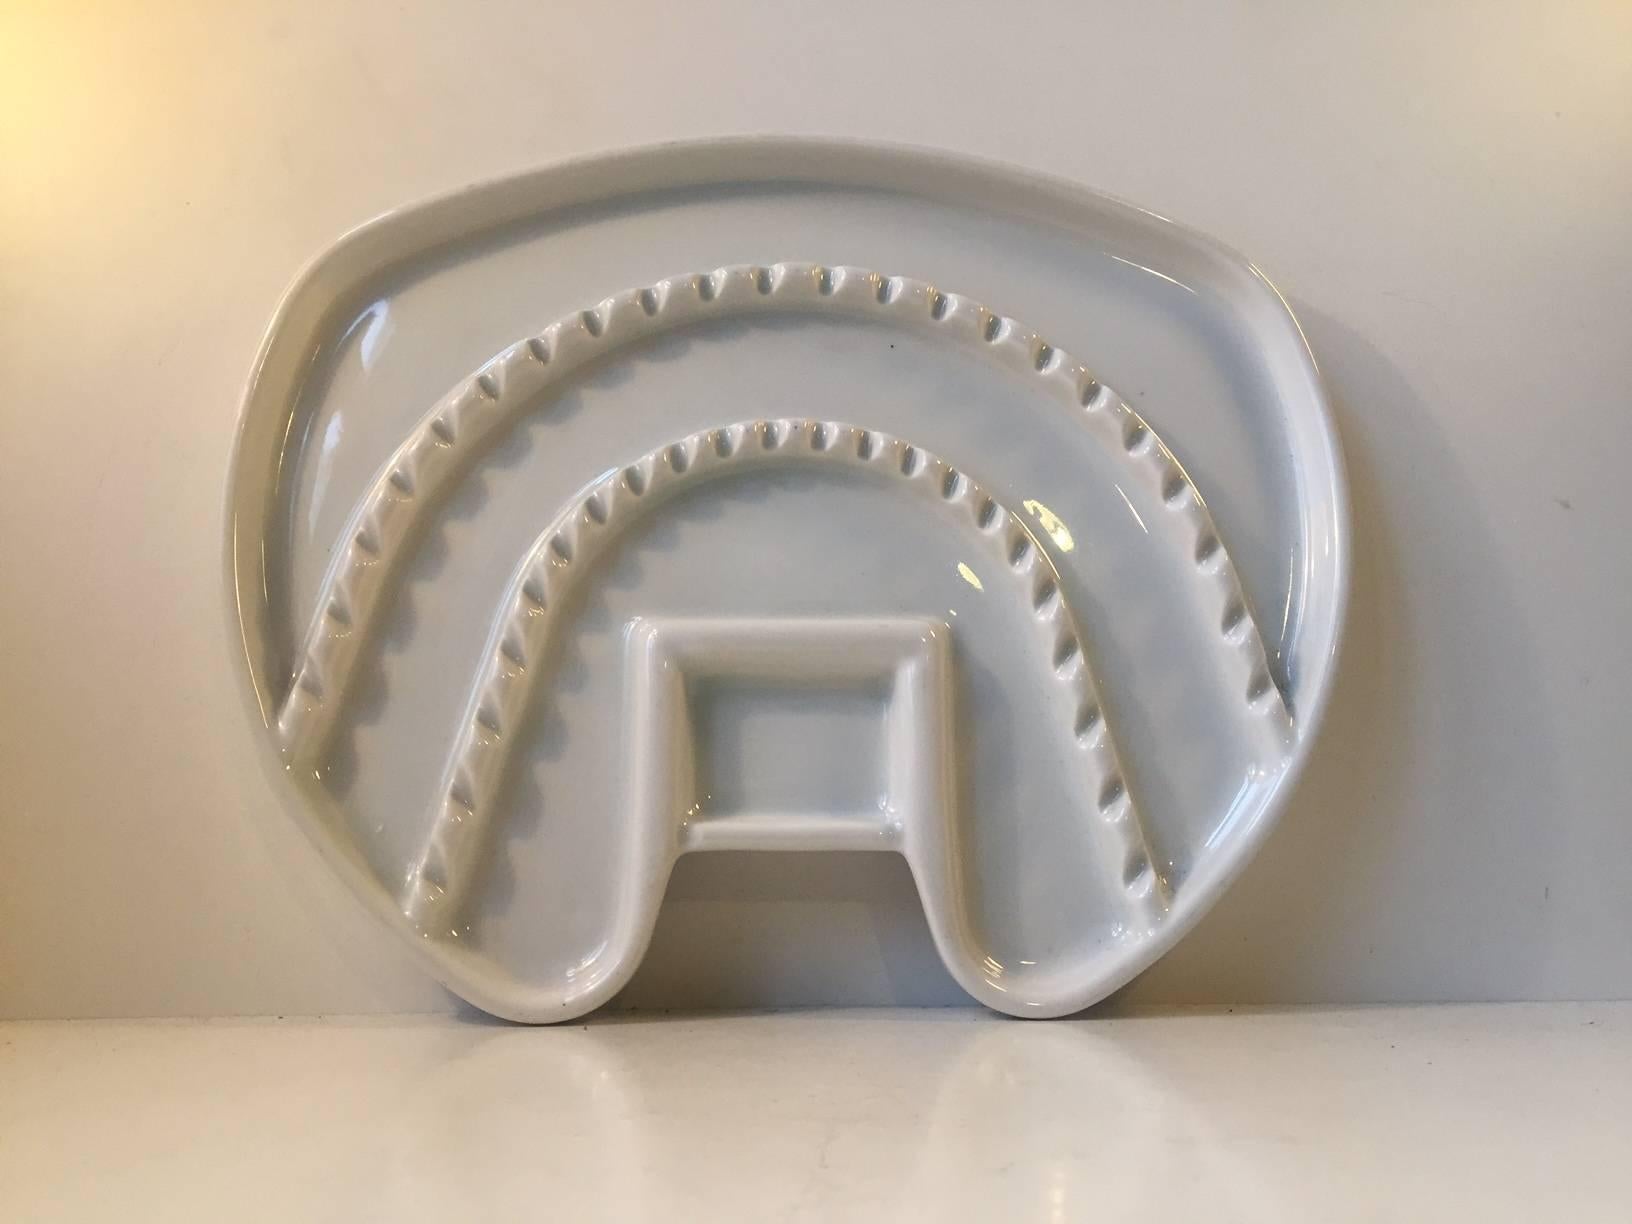 Striking heavy white tooth shaped porcelain tray used by a Dentist in the Southern part of Denmark in the 1930s. Manufactured in Germany probably on order. Beautiful intact Antique condition.